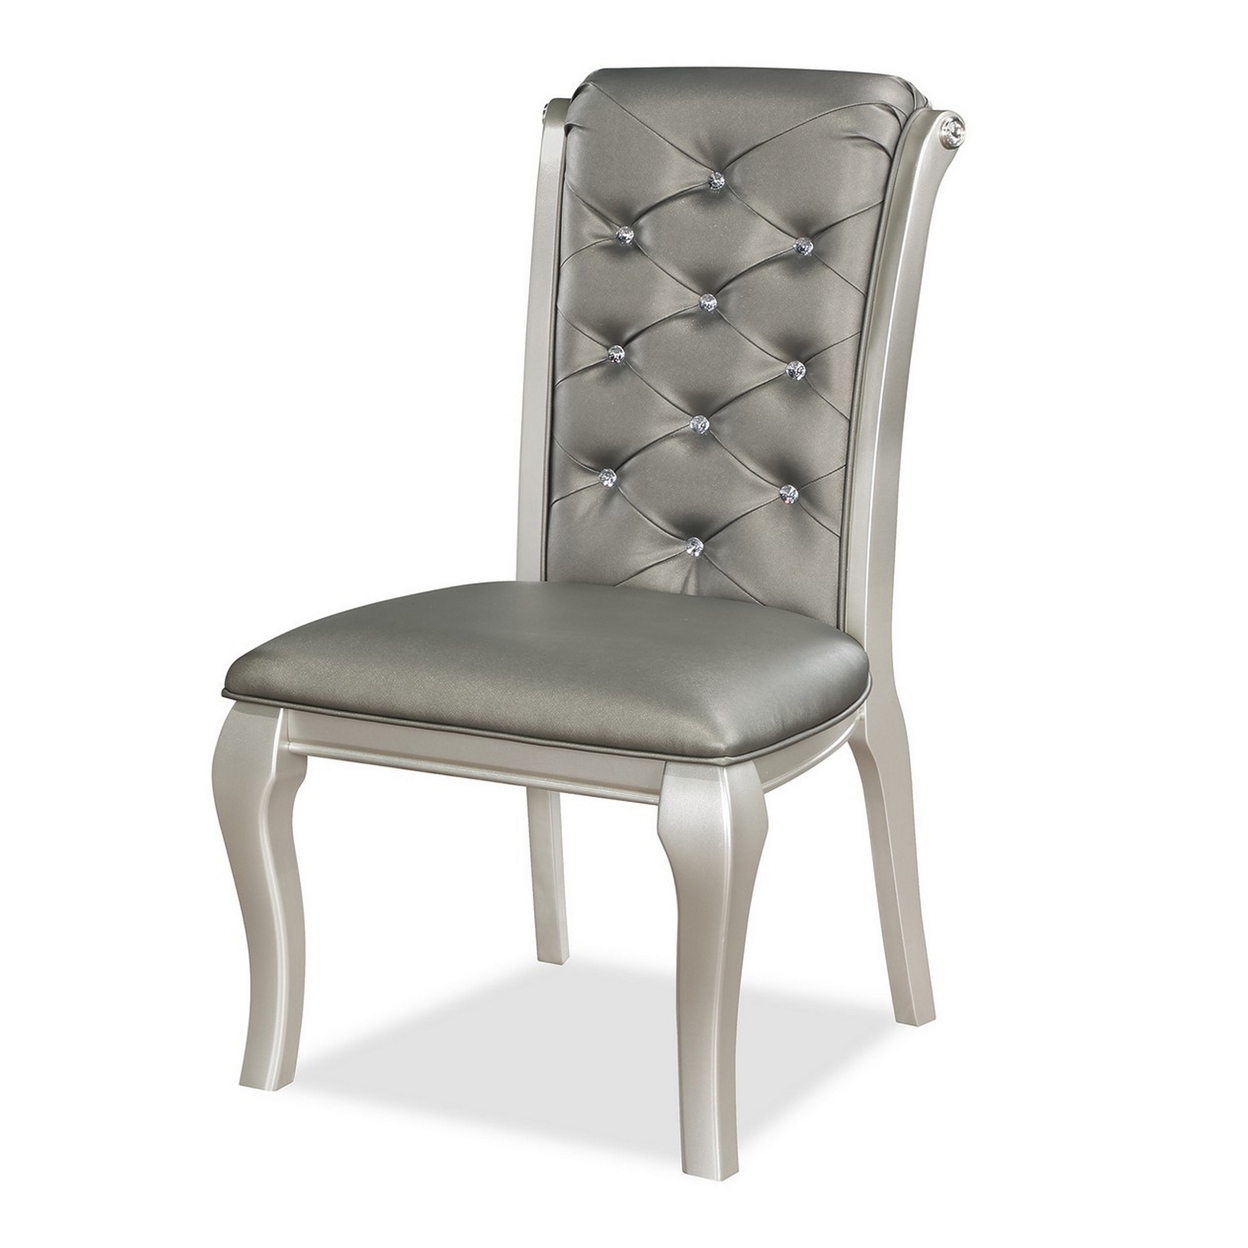 Harrison 20 Inch Side Chair Set Of 2, Classic Tufted Faux Leather, Gray -Saltoro Sherpi